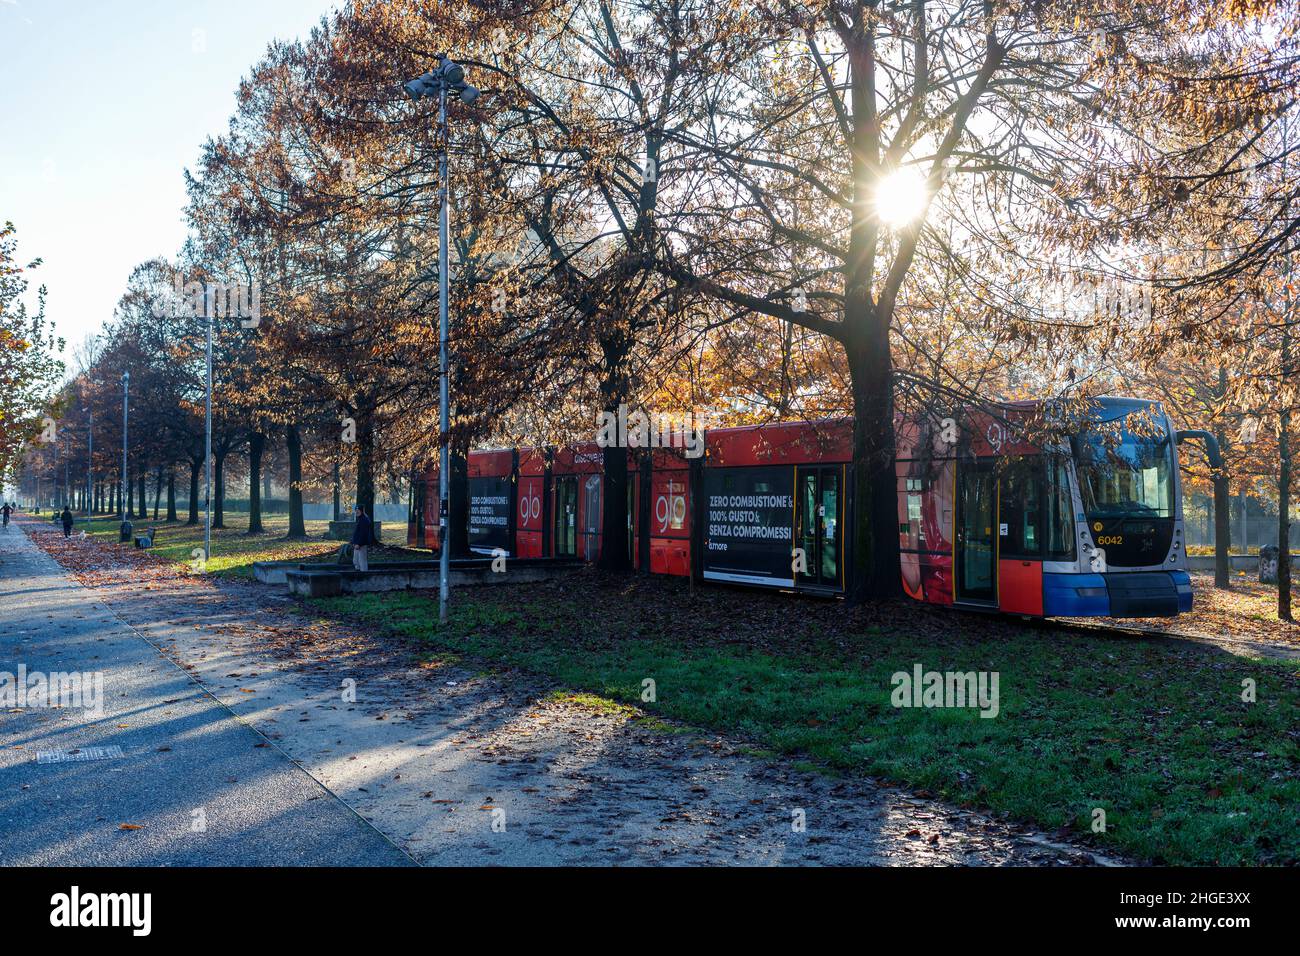 Turin, Piedmont, Italy - November 26, 2021: Tramway car parked in the new Dora Park, a public park born where once there were large industrial plants. Stock Photo